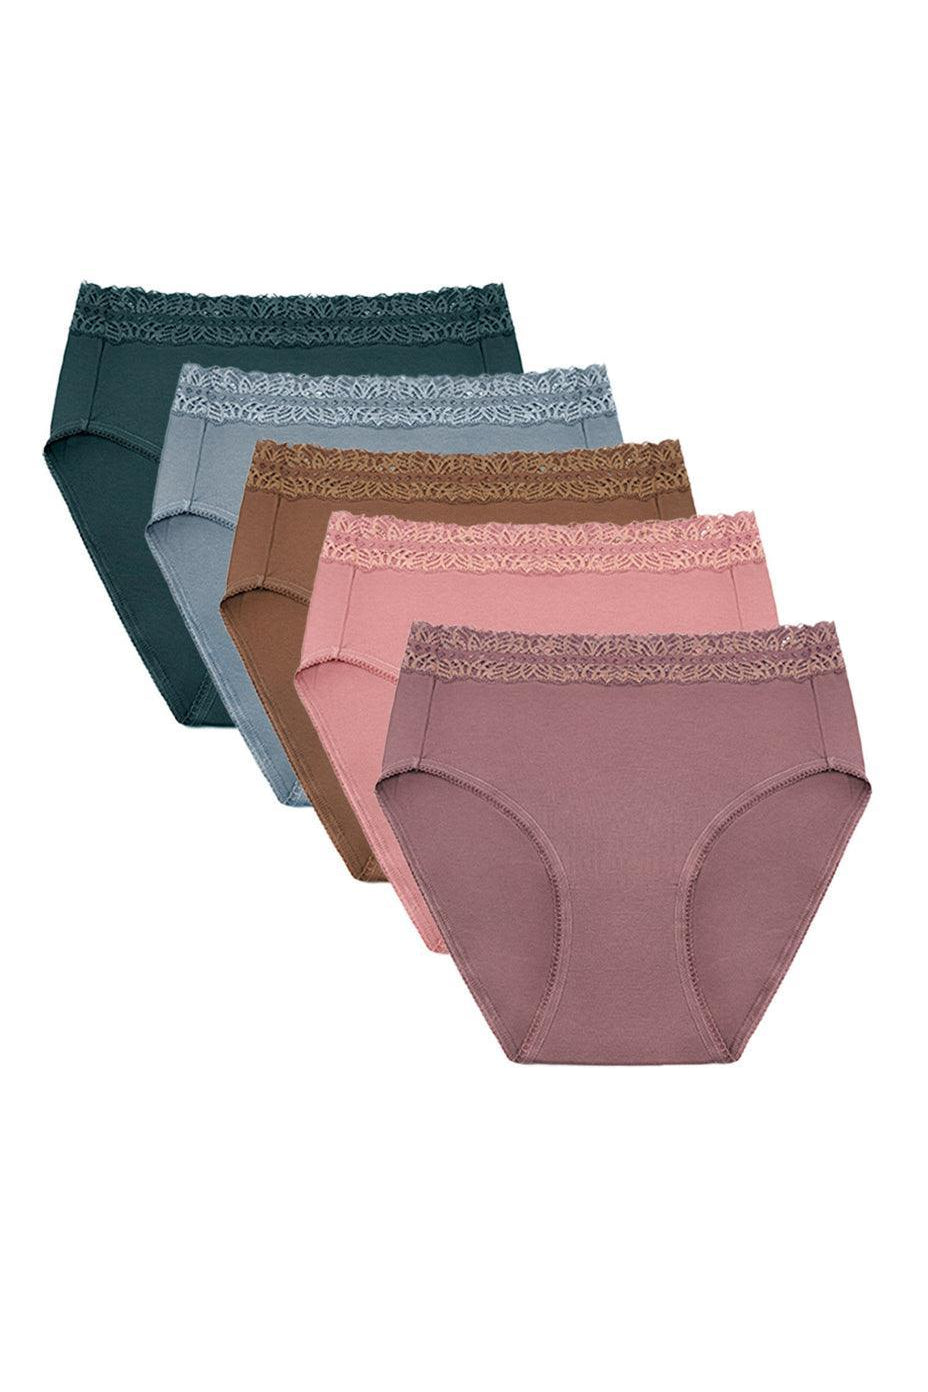 High-Waisted Postpartum Recovery Panties (5 Pack) - Milk & Baby 